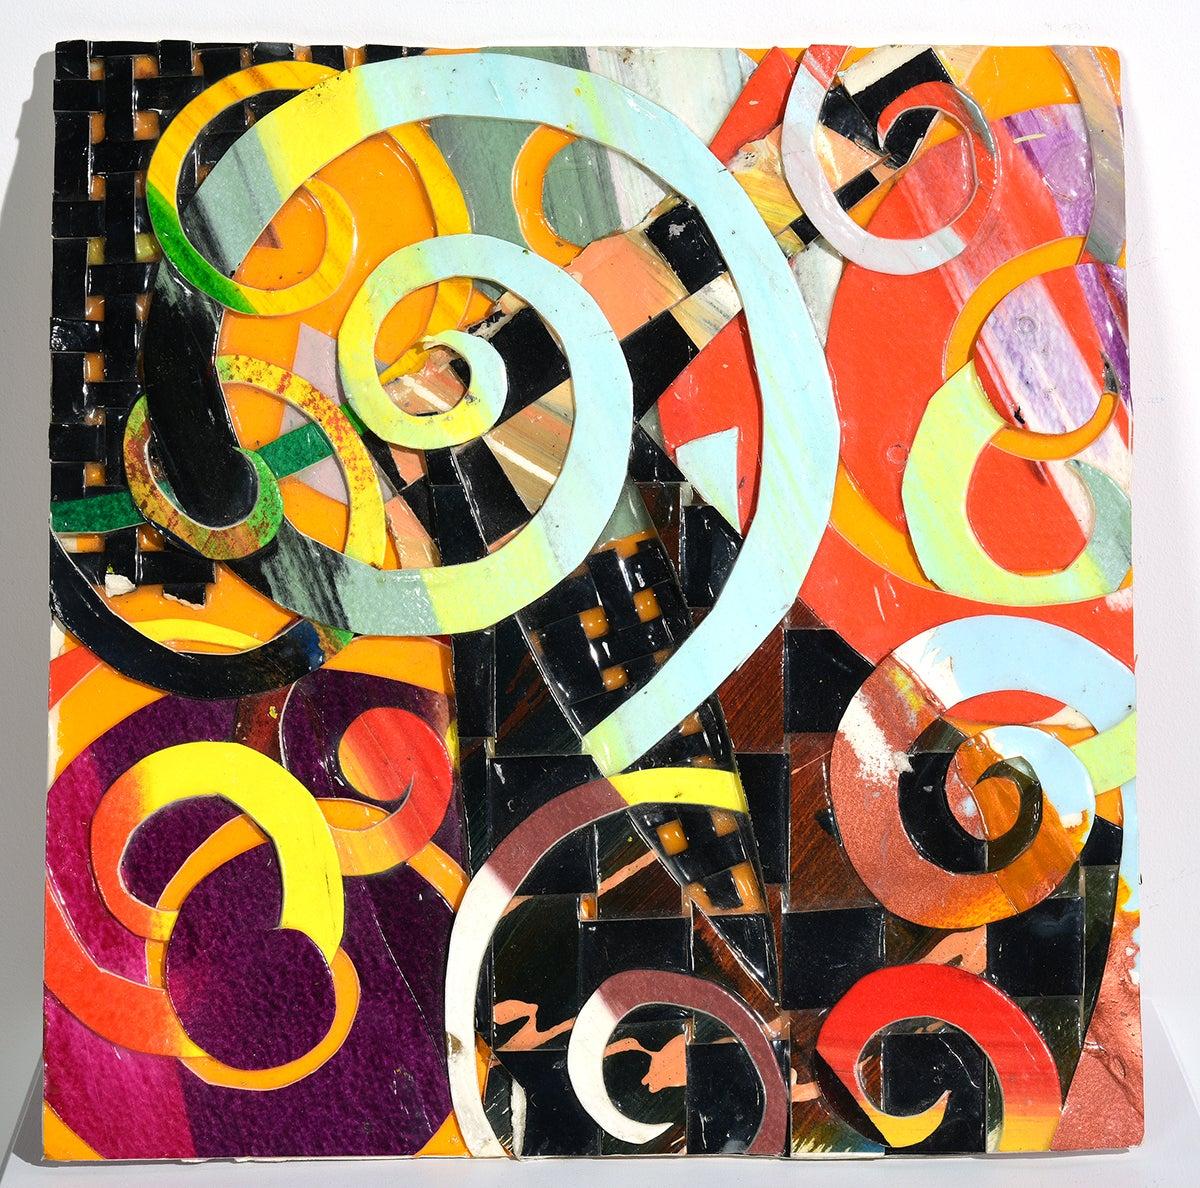 "Home #38" Multi-colors, Abstract, Brilliant, Swirl Motif, African-American